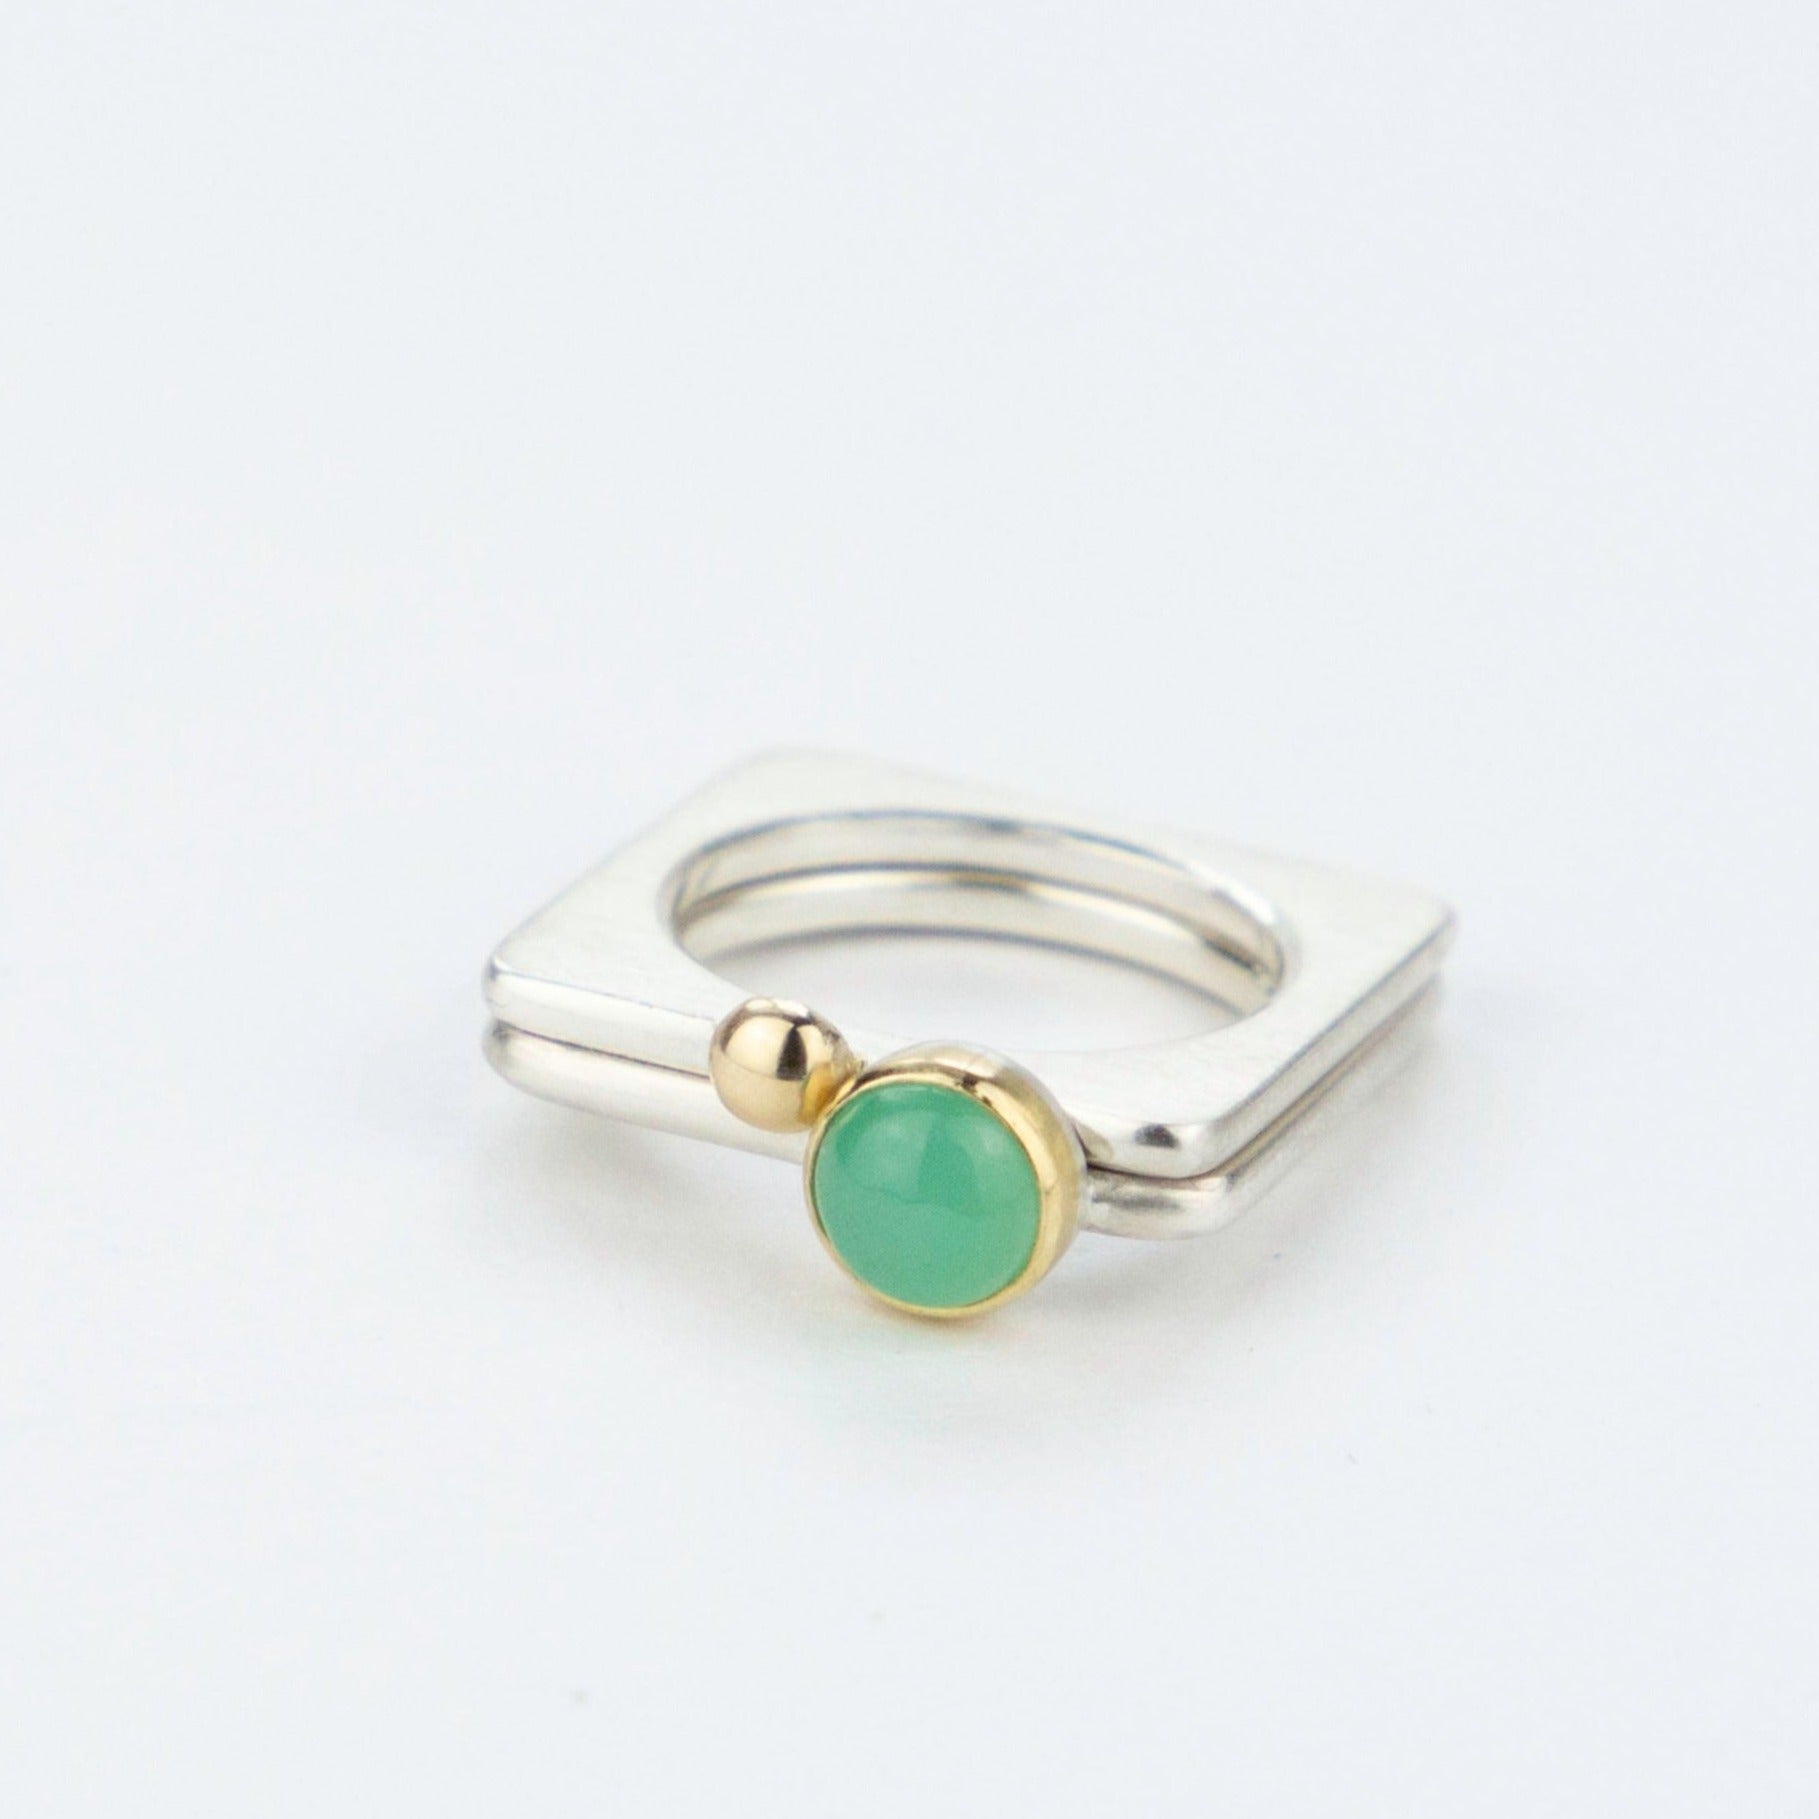 Square silver ring with 6mm chrysoprase stacked with ring with gold ball